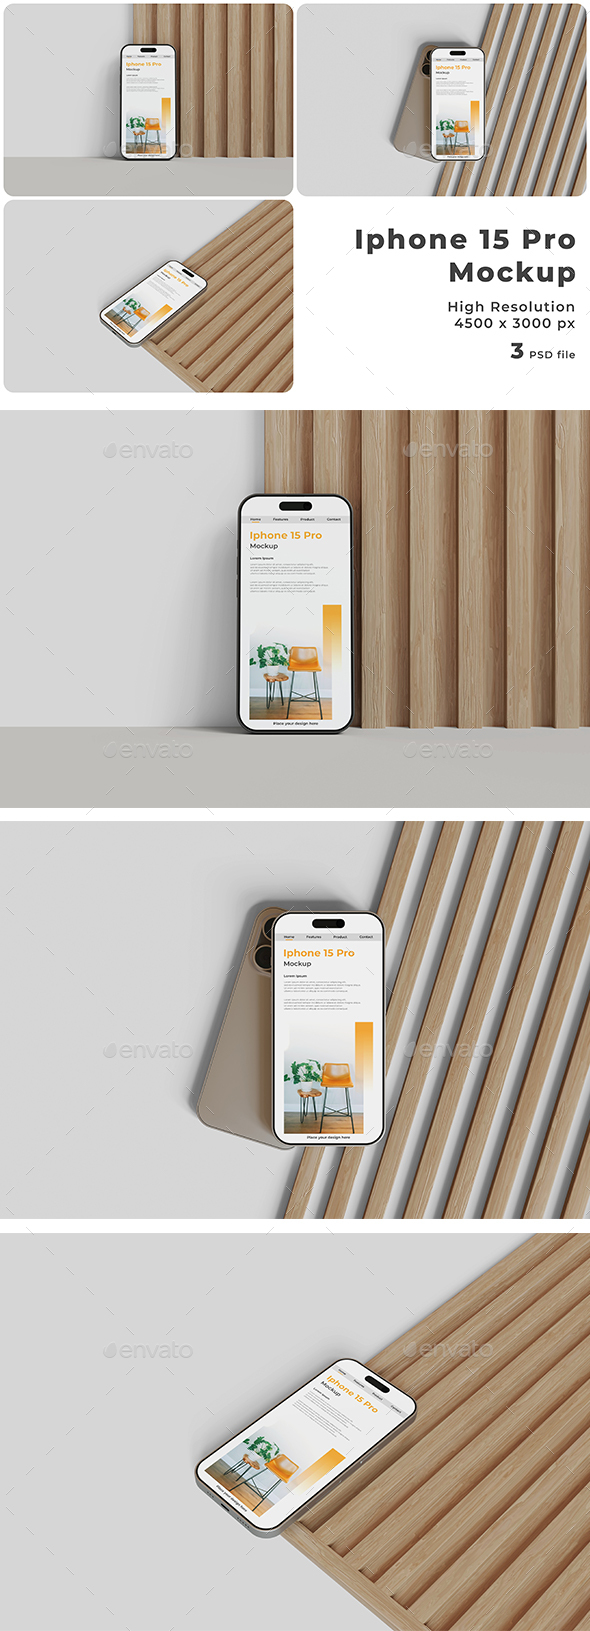 [DOWNLOAD]Iphone 15 pro Mockup Template